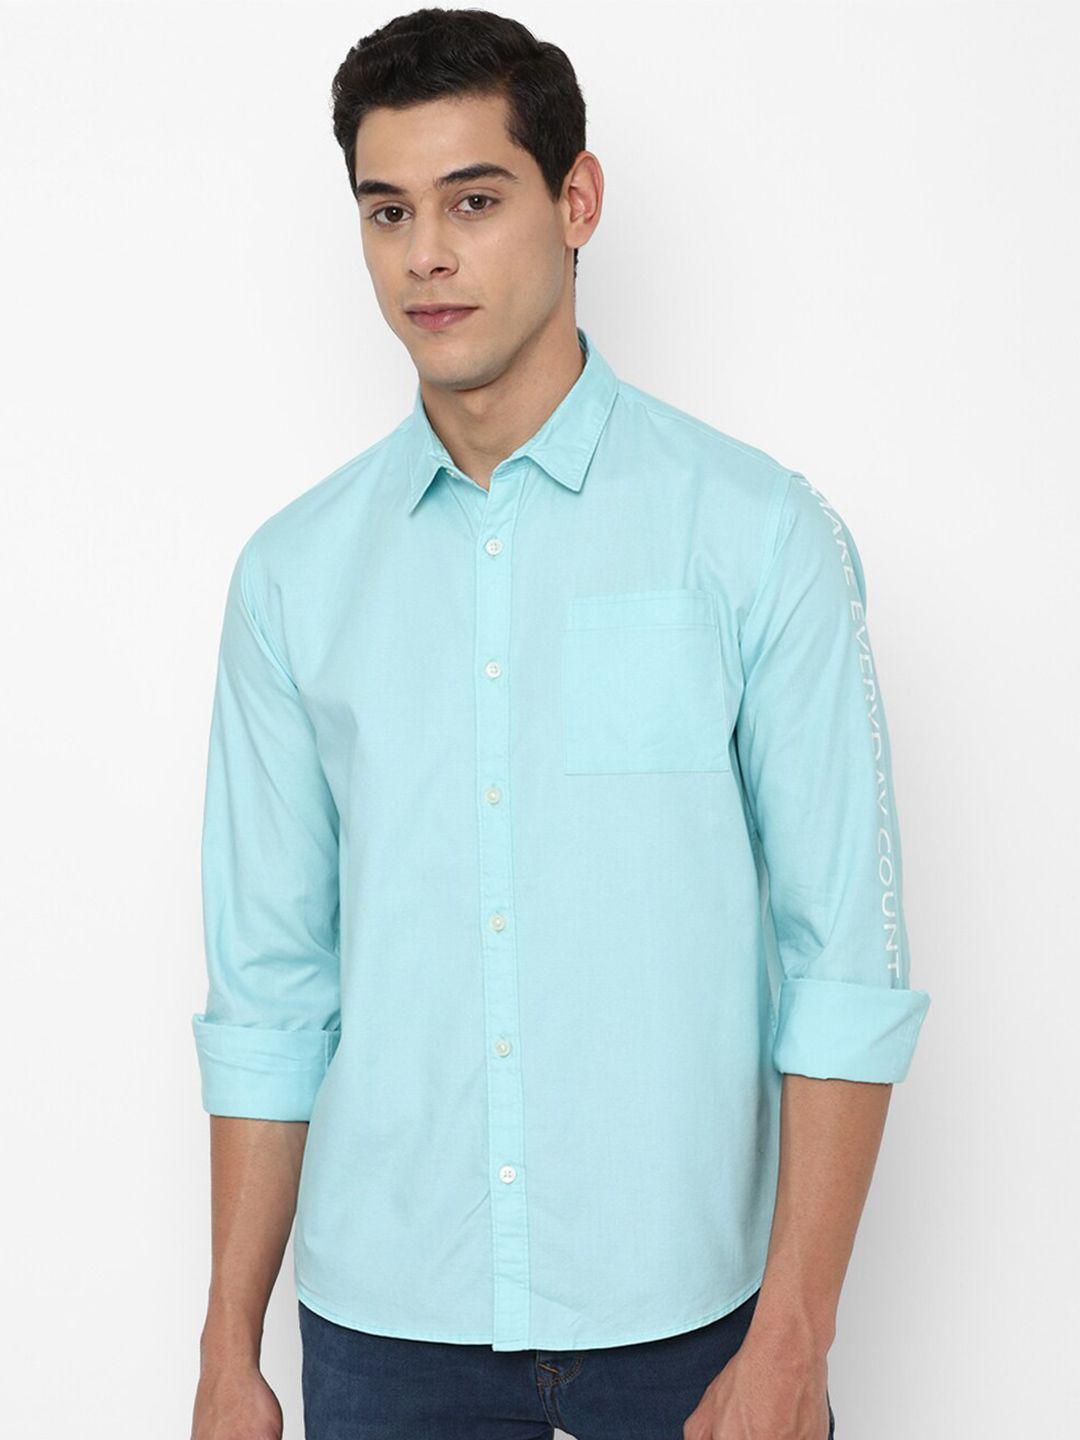 forever-21-men-turquoise-blue-pure-cotton-solid-regular-fit-casual-shirt